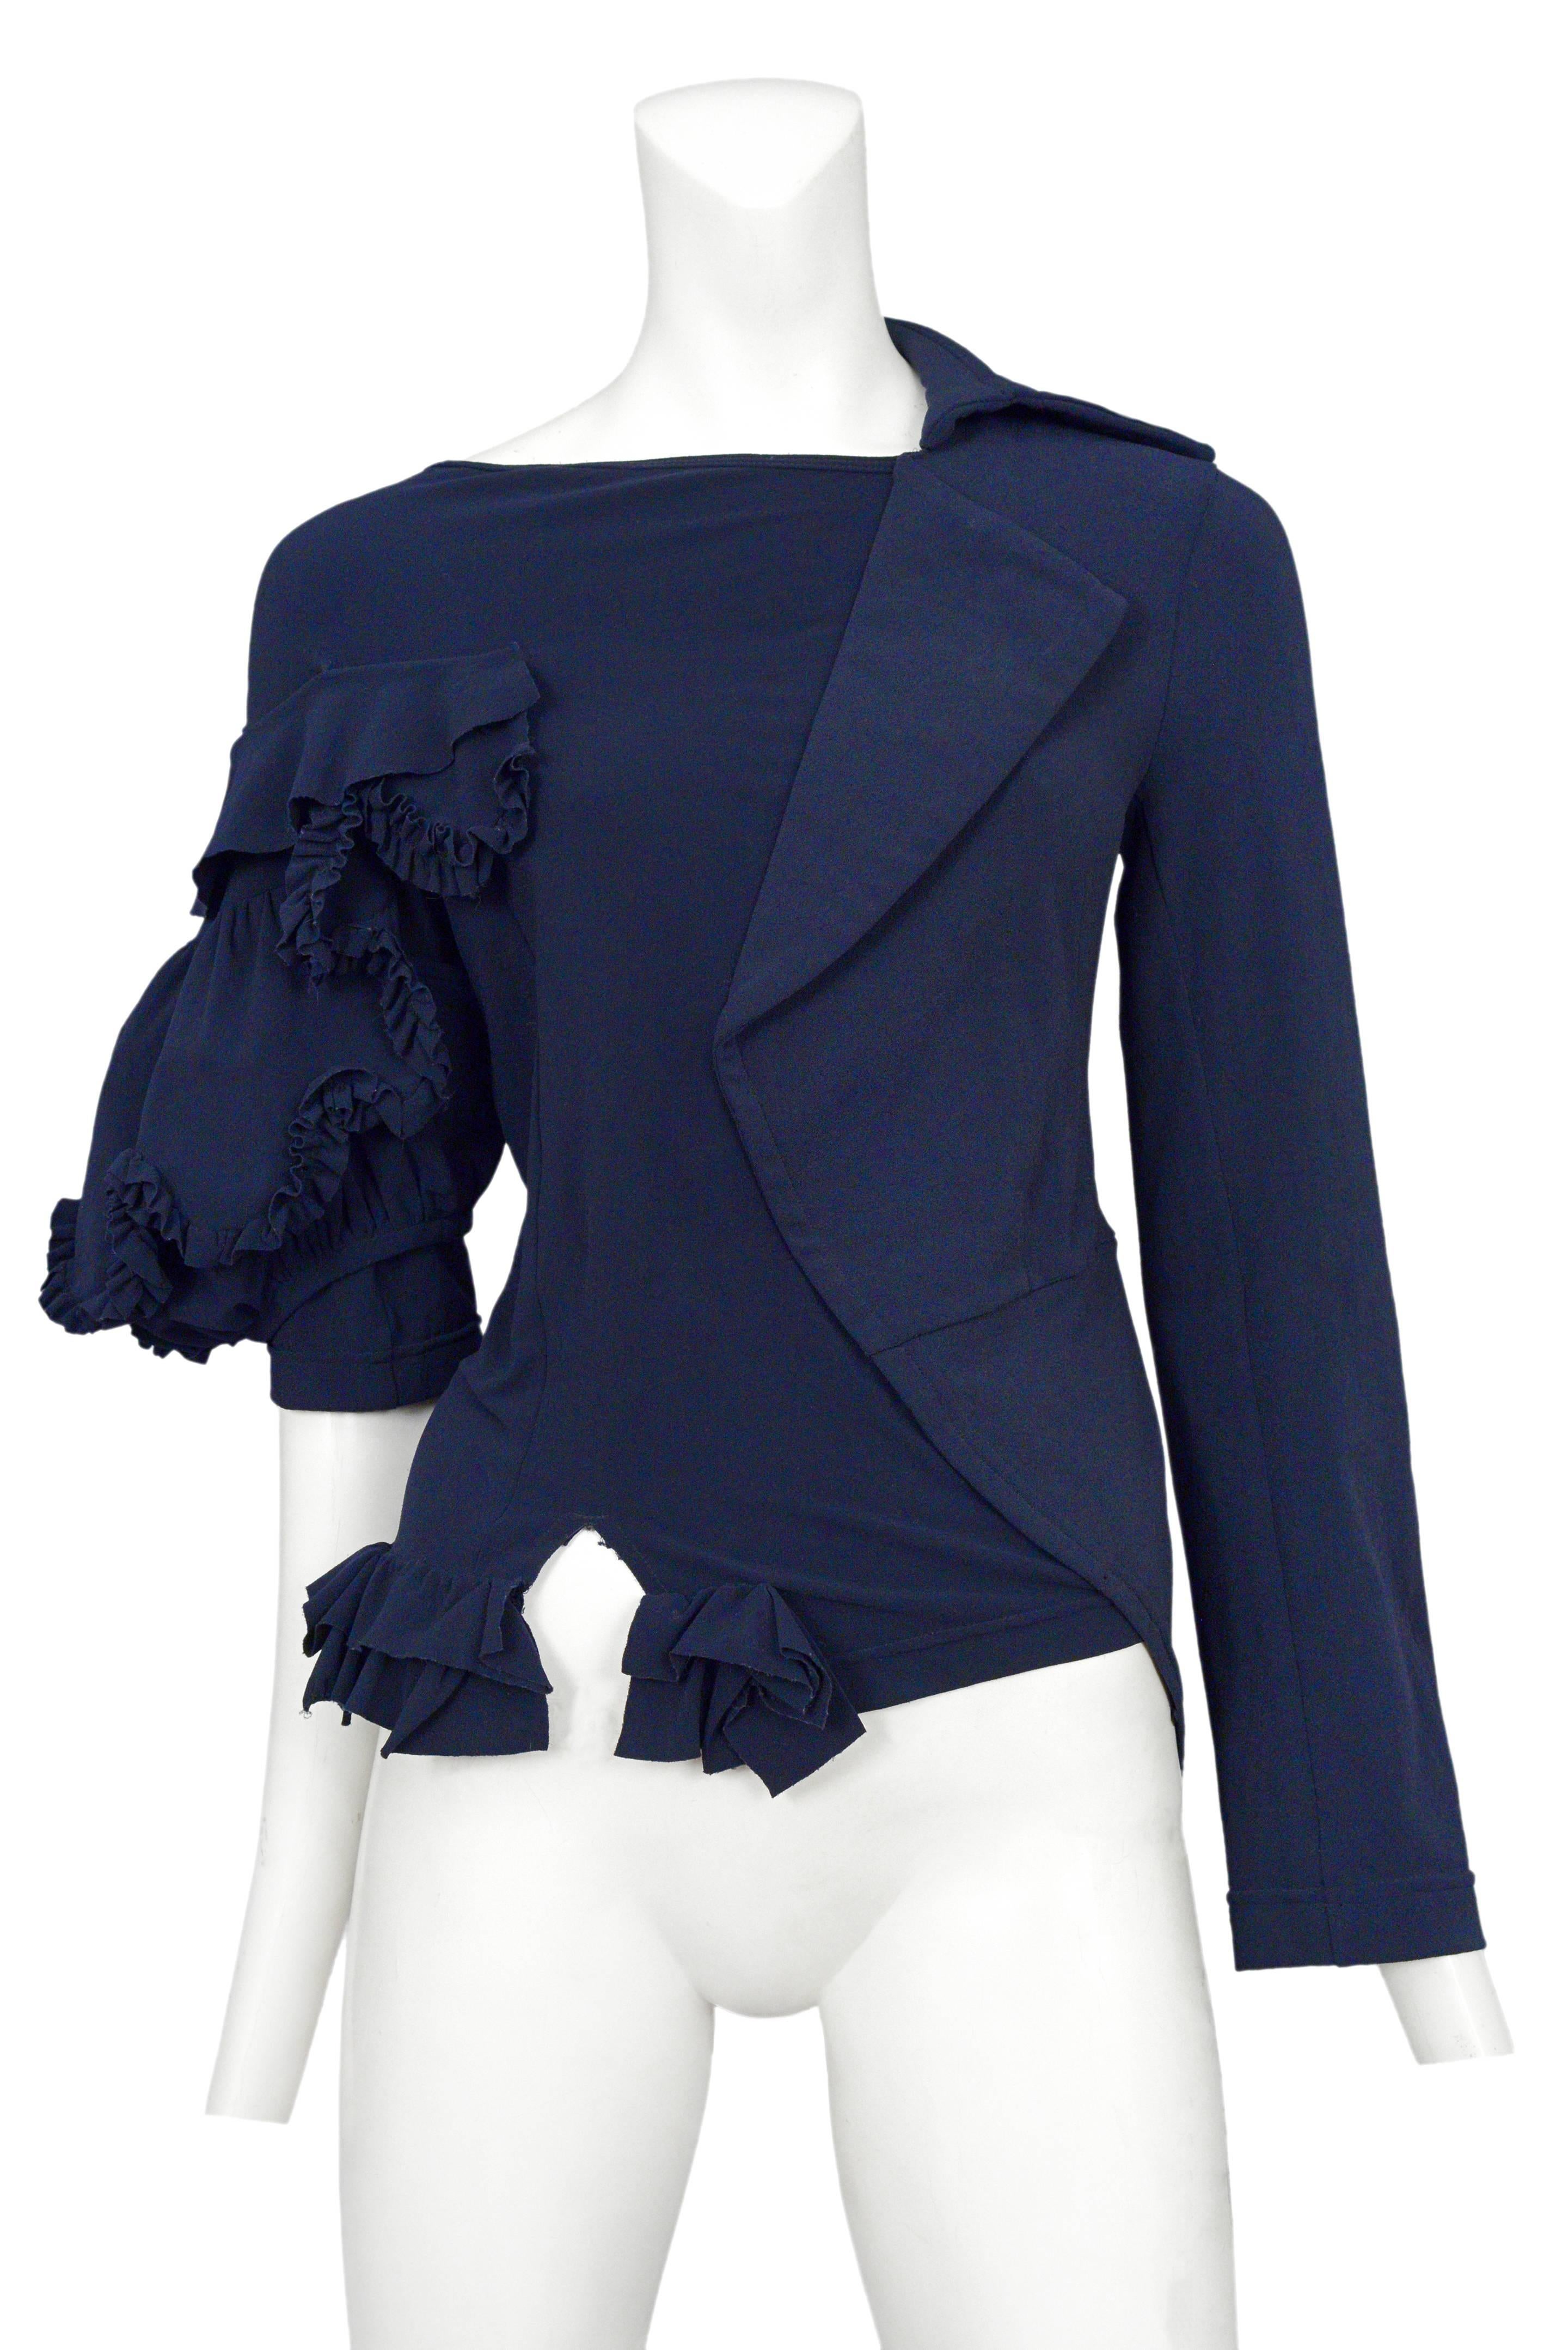 Vintage Comme des Garcons navy top featuring abstract ruffles on the 3/4 length right sleeve and a faux tuxedo jacket attached to the left sleeve. Circa 2007.